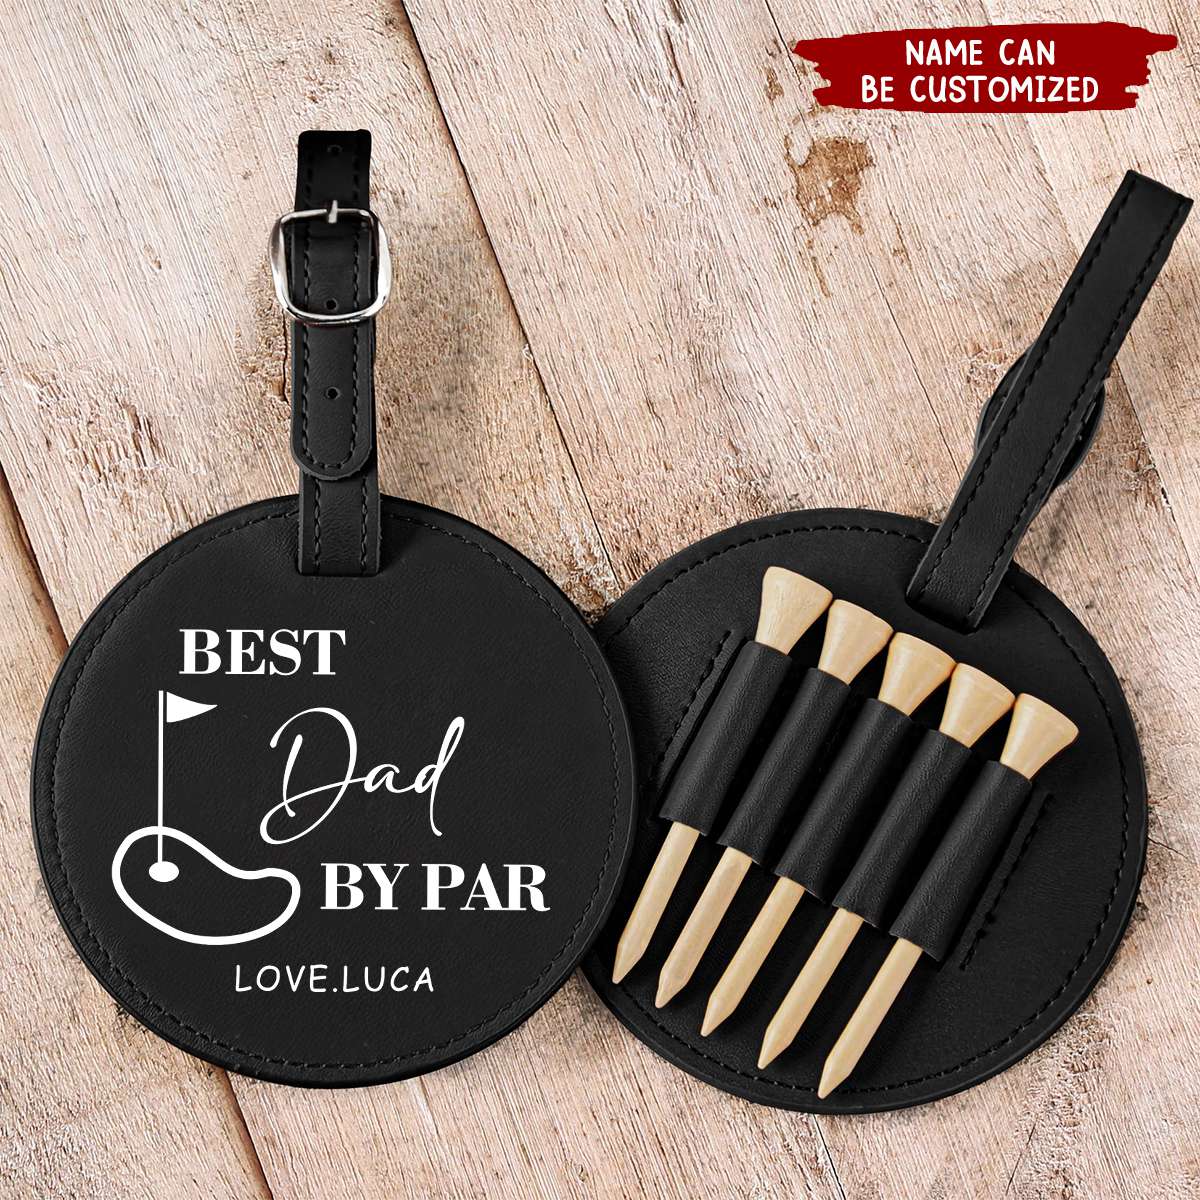 Best Dad By Par Personalized Leather Golf Bag Tag